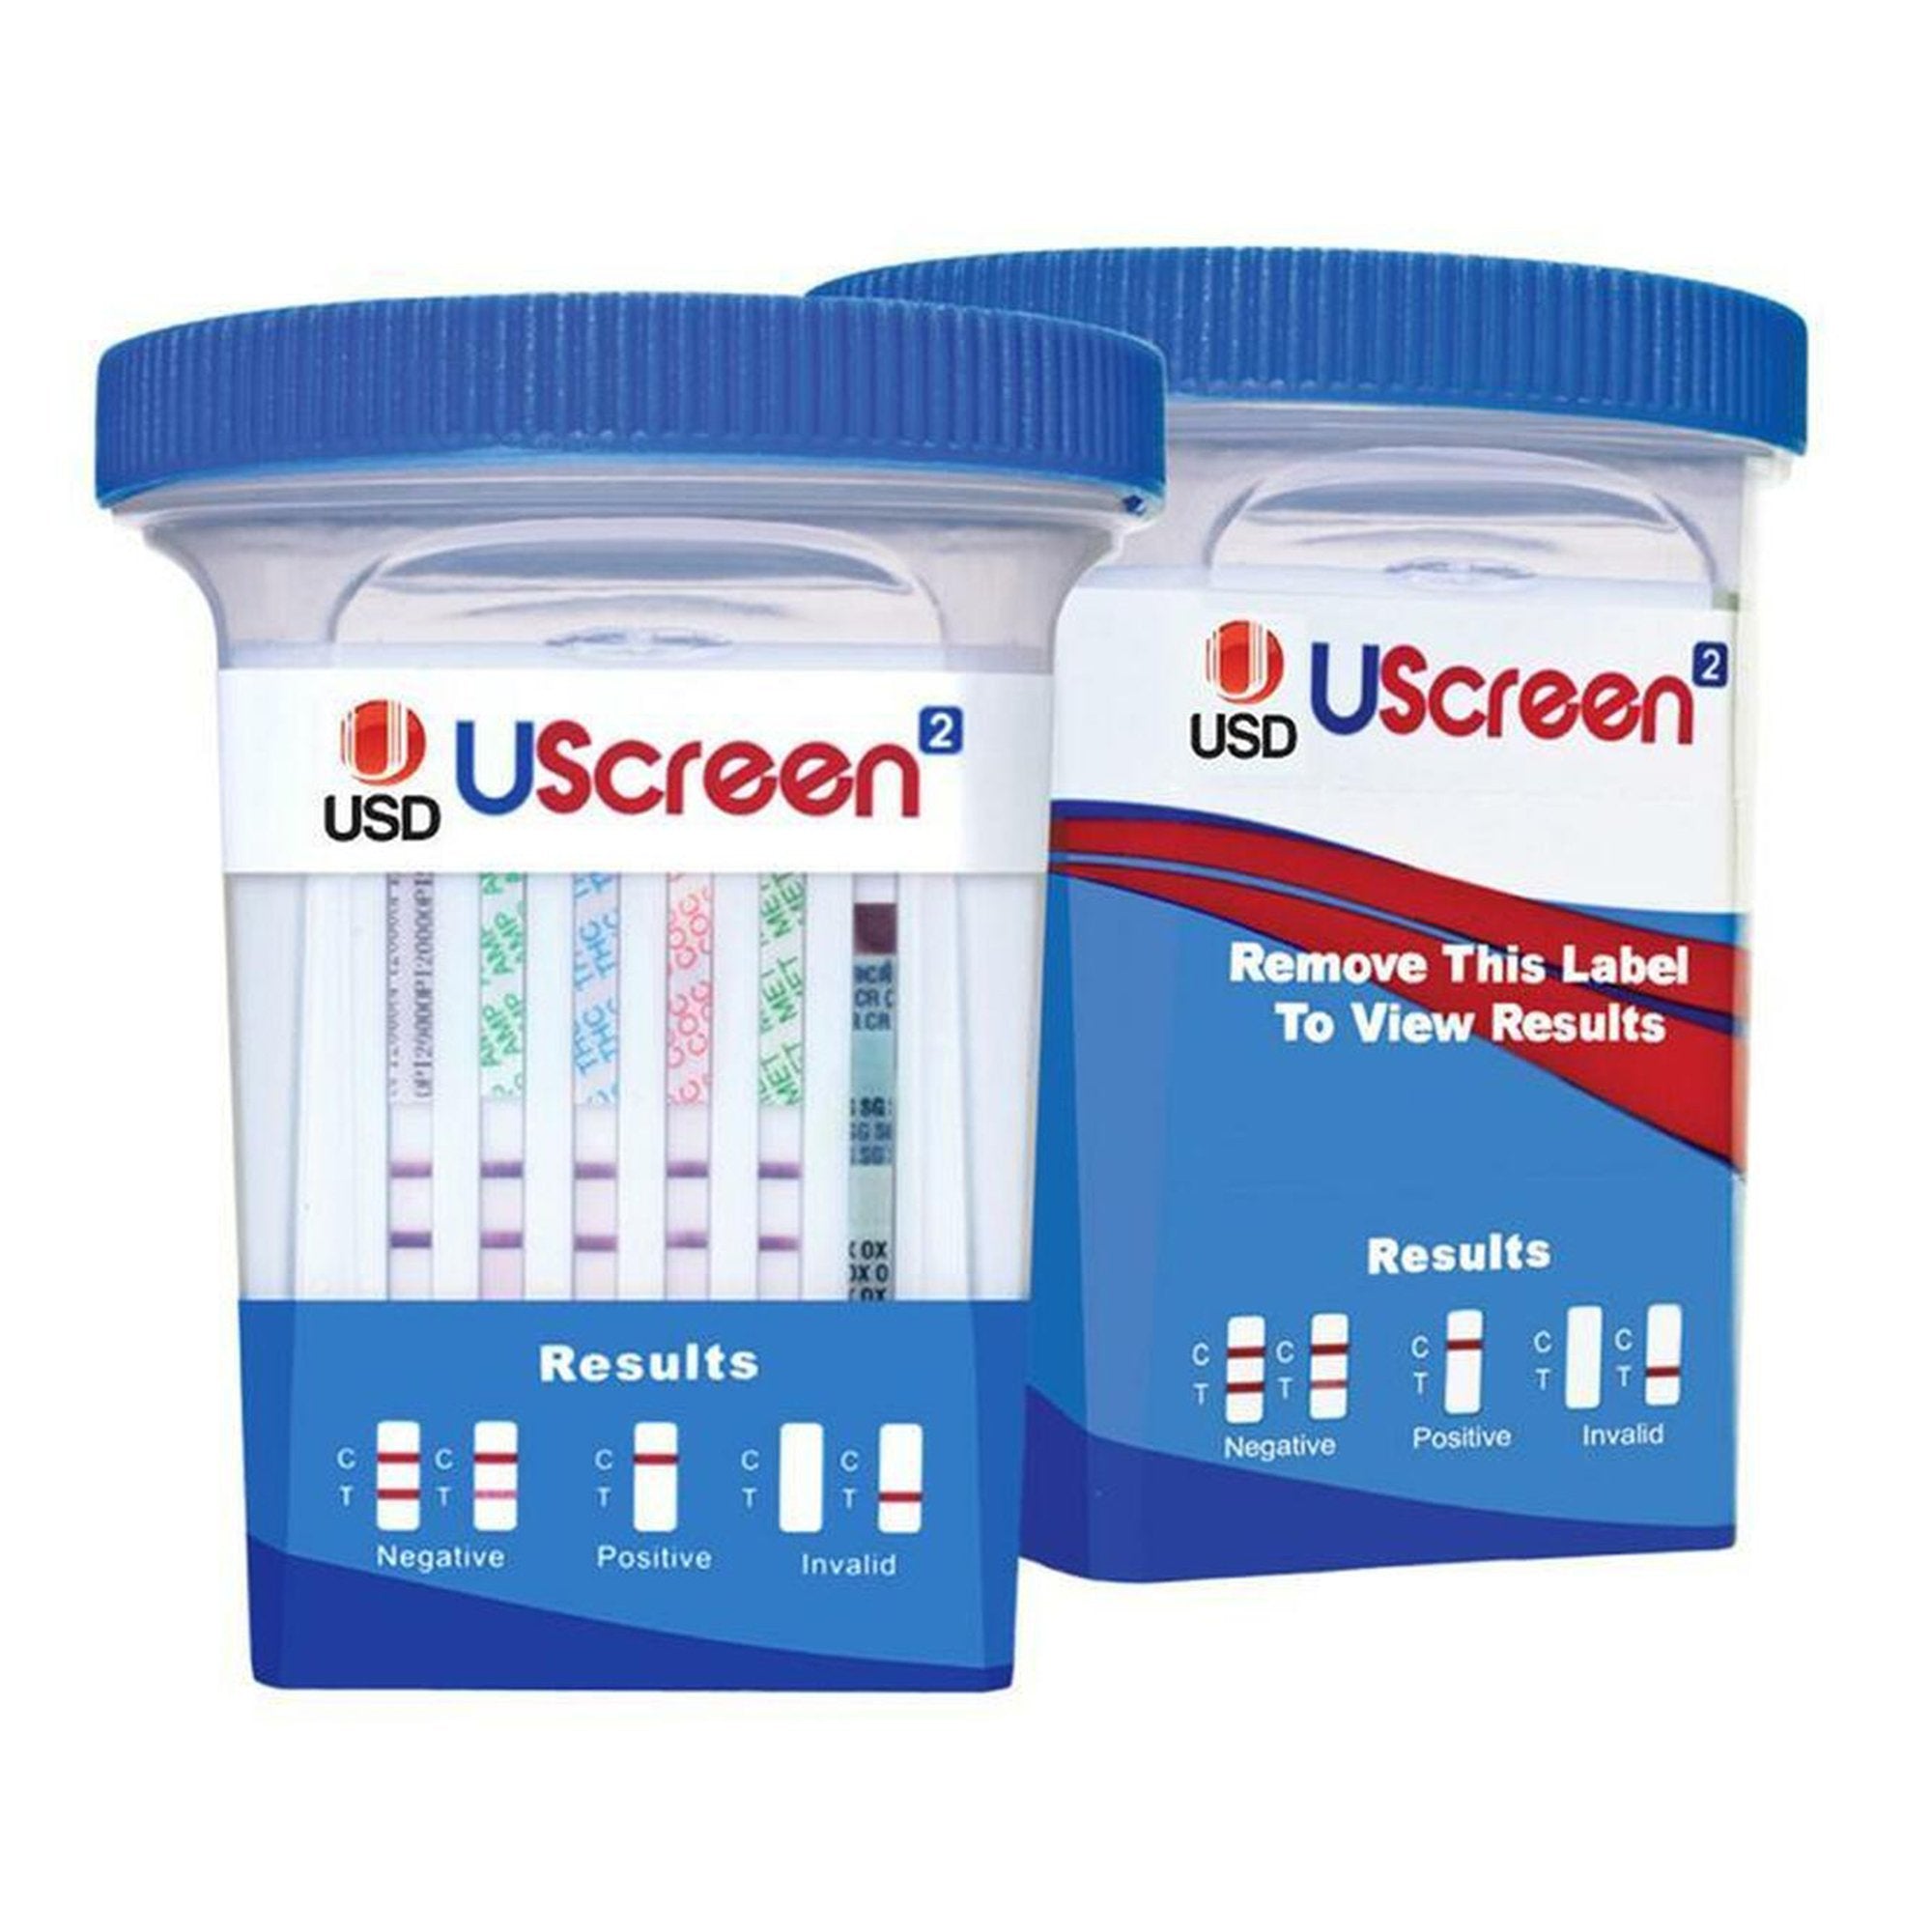 Drugs of Abuse Test Kit UScreen 12-Drug Panel with Adulterants AMP, BAR, BUP, BZO, COC, mAMP/MET, MDMA, MTD, OPI300, OXY, PCP, TCA (CR, pH, SG) Urine Sample 25 Tests CLIA Waived